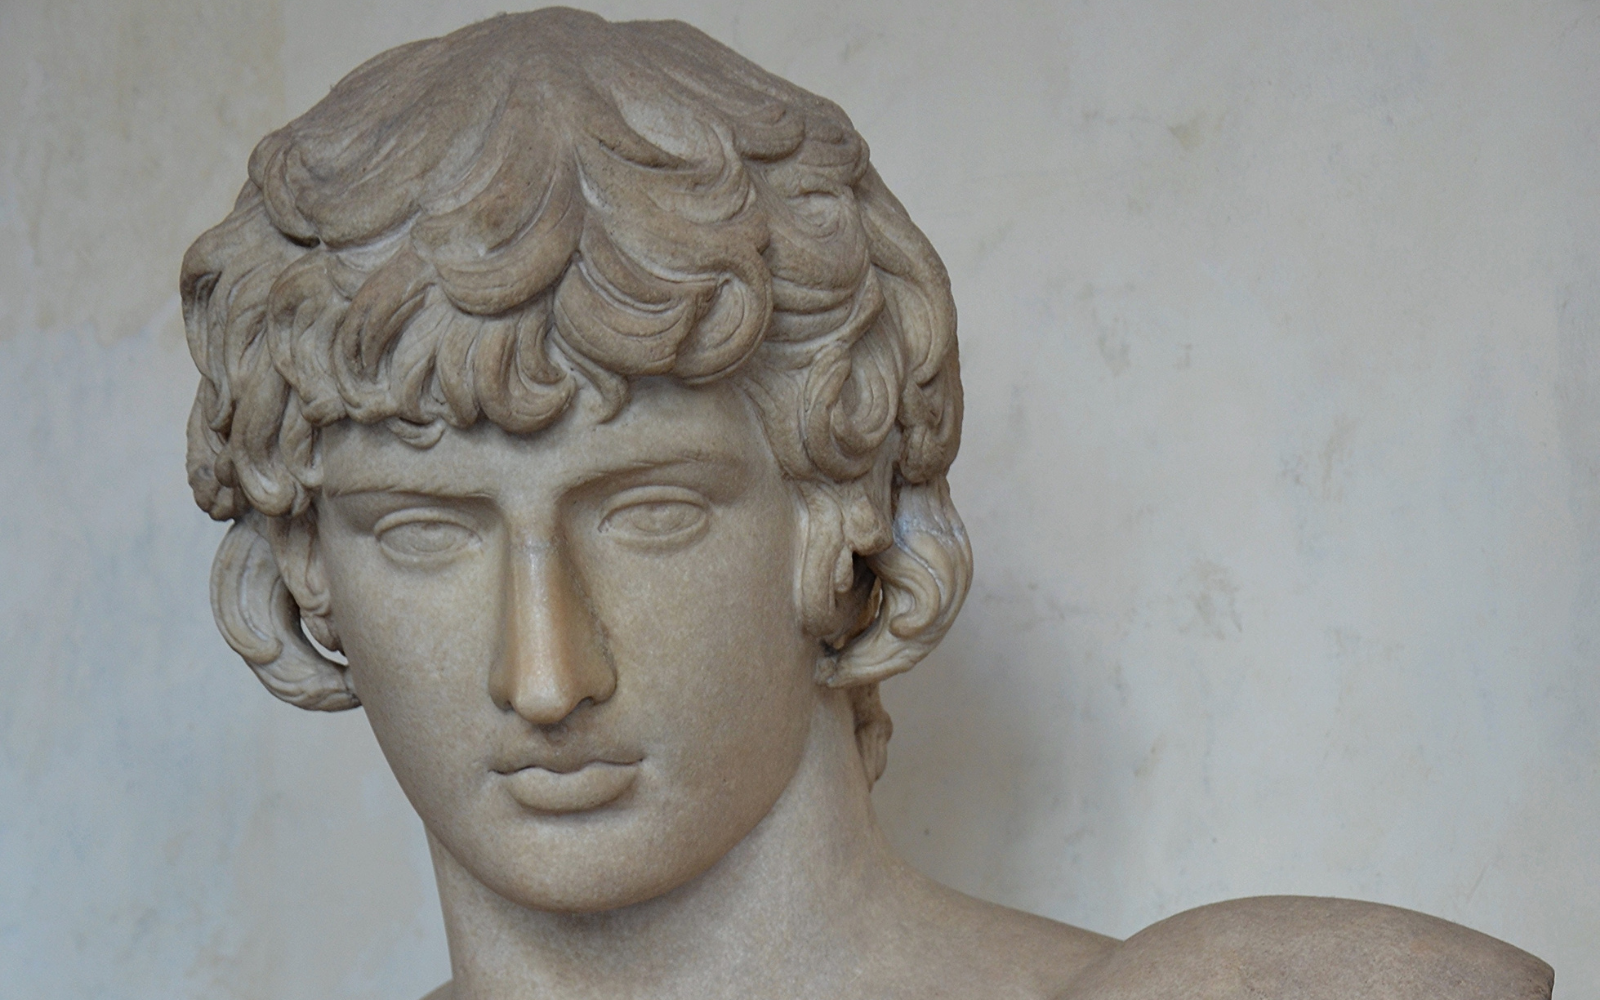 Detail of the bust of Antinous